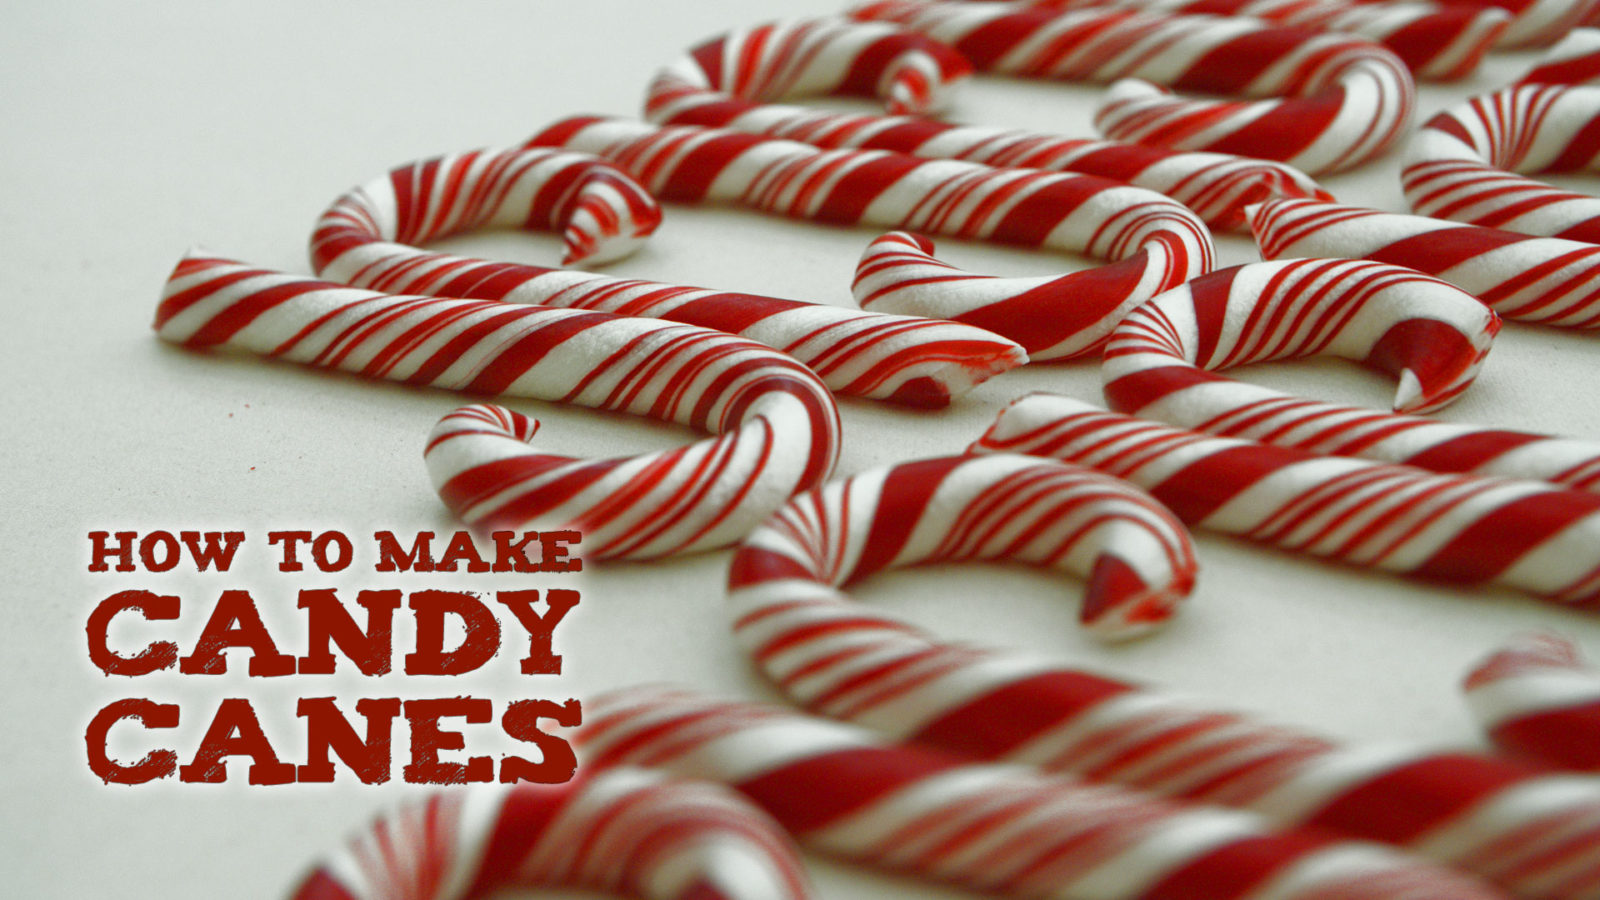 How to Make Candy Canes